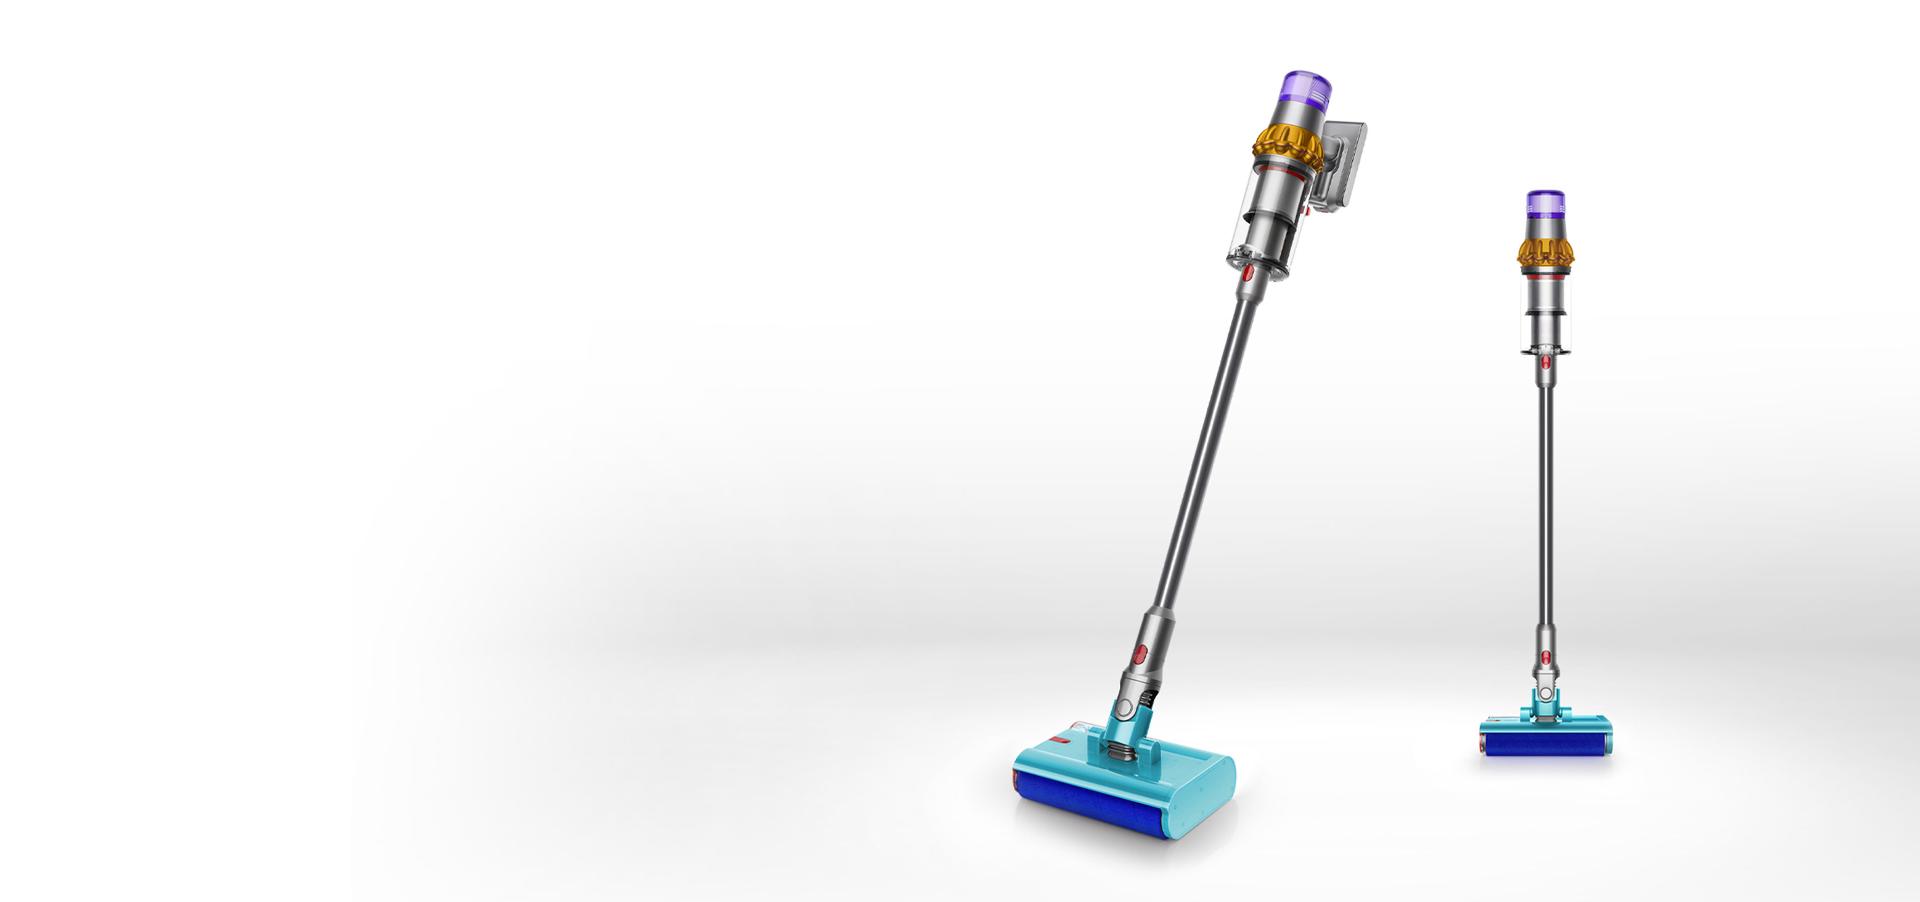 Dyson V15s Detect Submarine with wet roller head washes hard floor. Second cleaner head sits behind it.